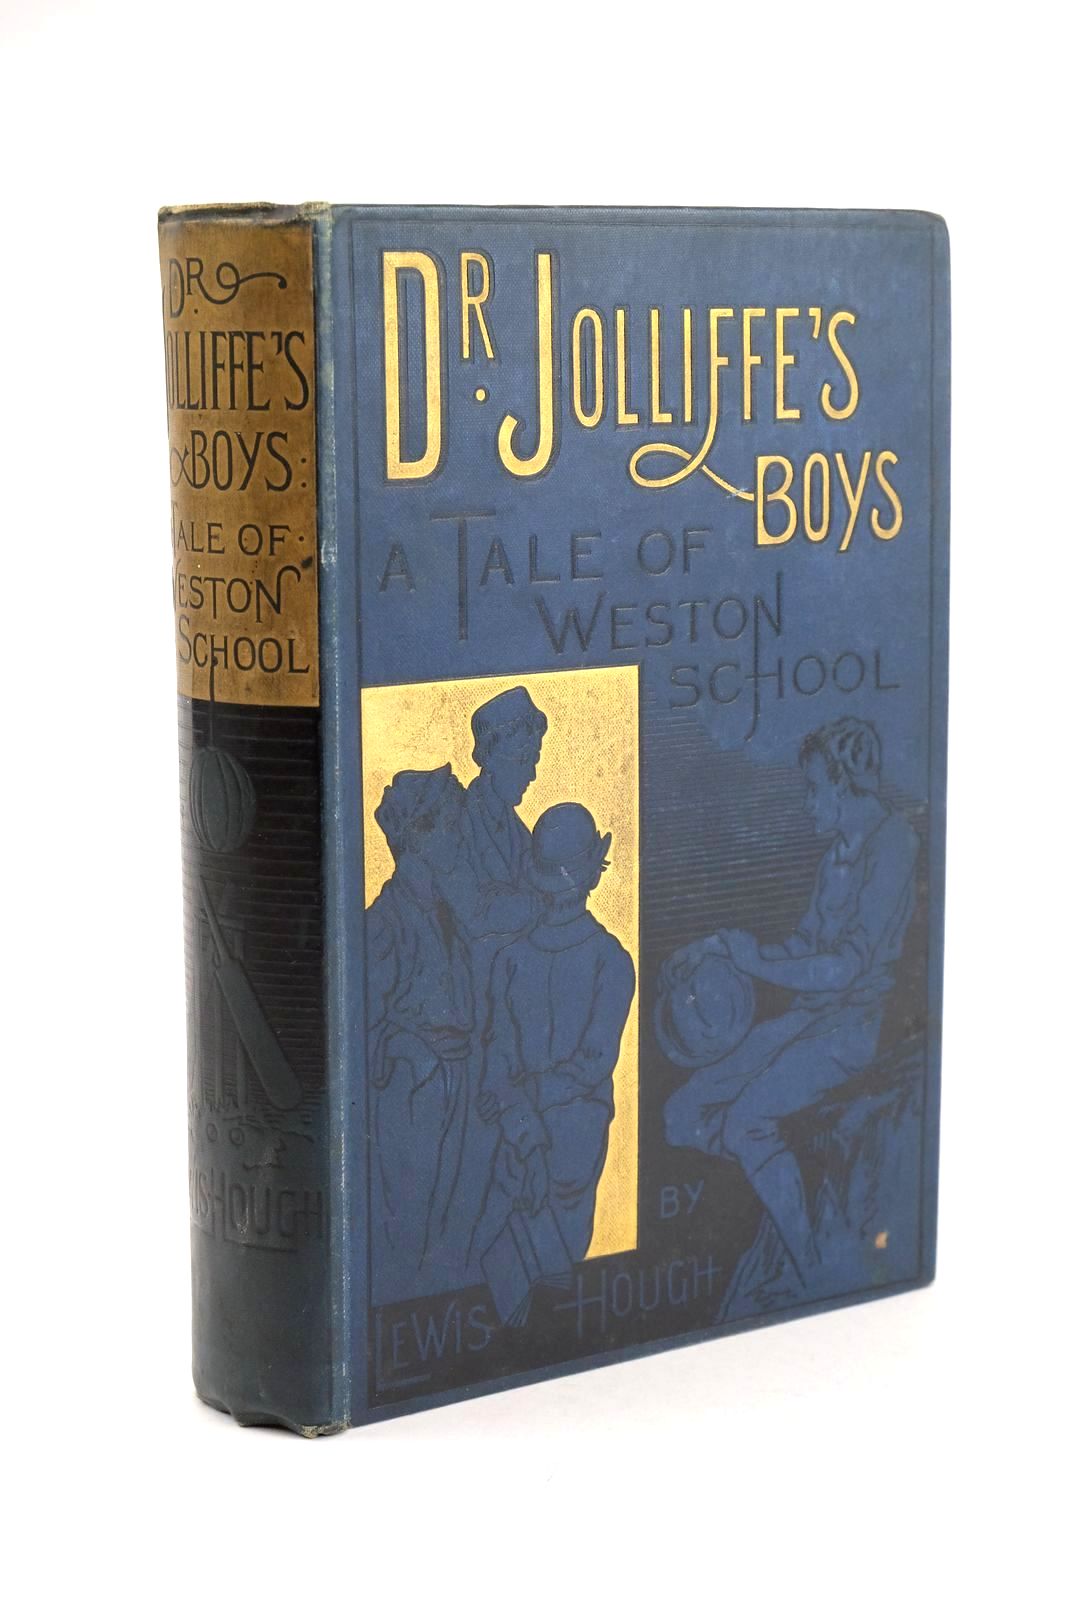 Photo of DR. JOLLIFFE'S BOYS:  A TALE OF WESTON SCHOOL written by Hough, Lewis illustrated by Feller, Frank published by Blackie &amp; Son Ltd. (STOCK CODE: 1324658)  for sale by Stella & Rose's Books